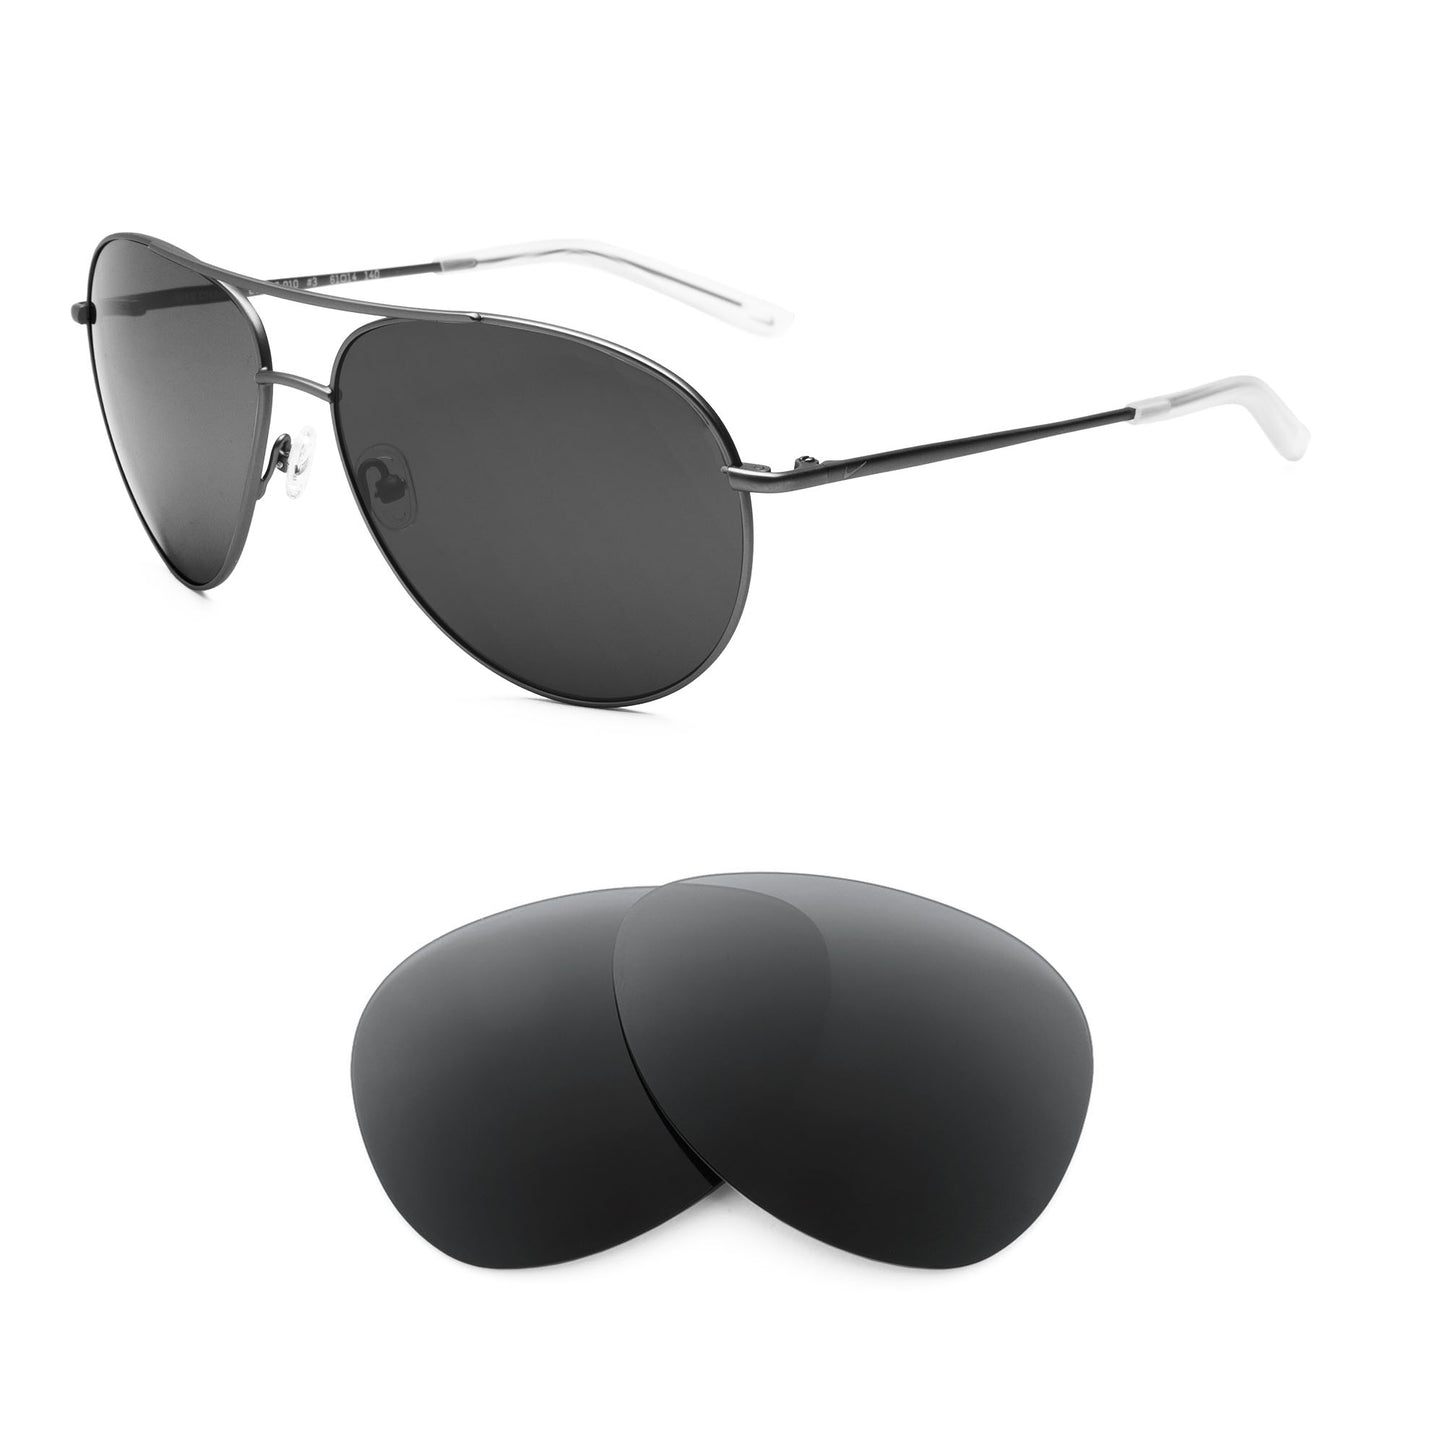 Nike Chance sunglasses with replacement lenses